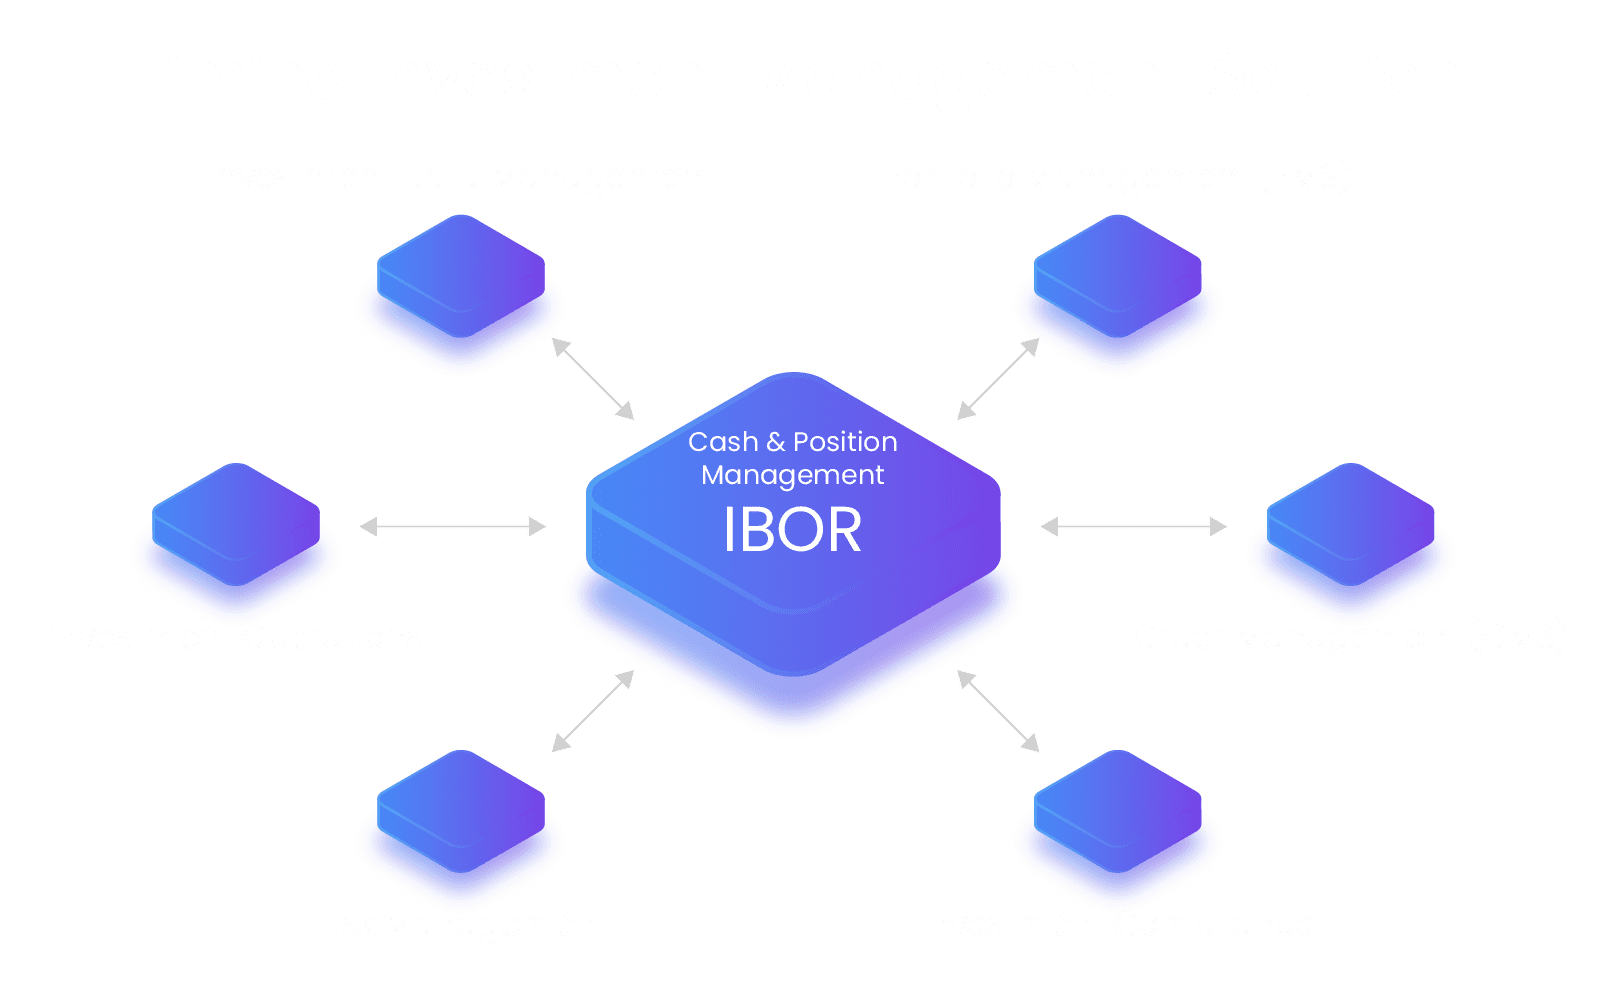 Investment Management Solution from Limina